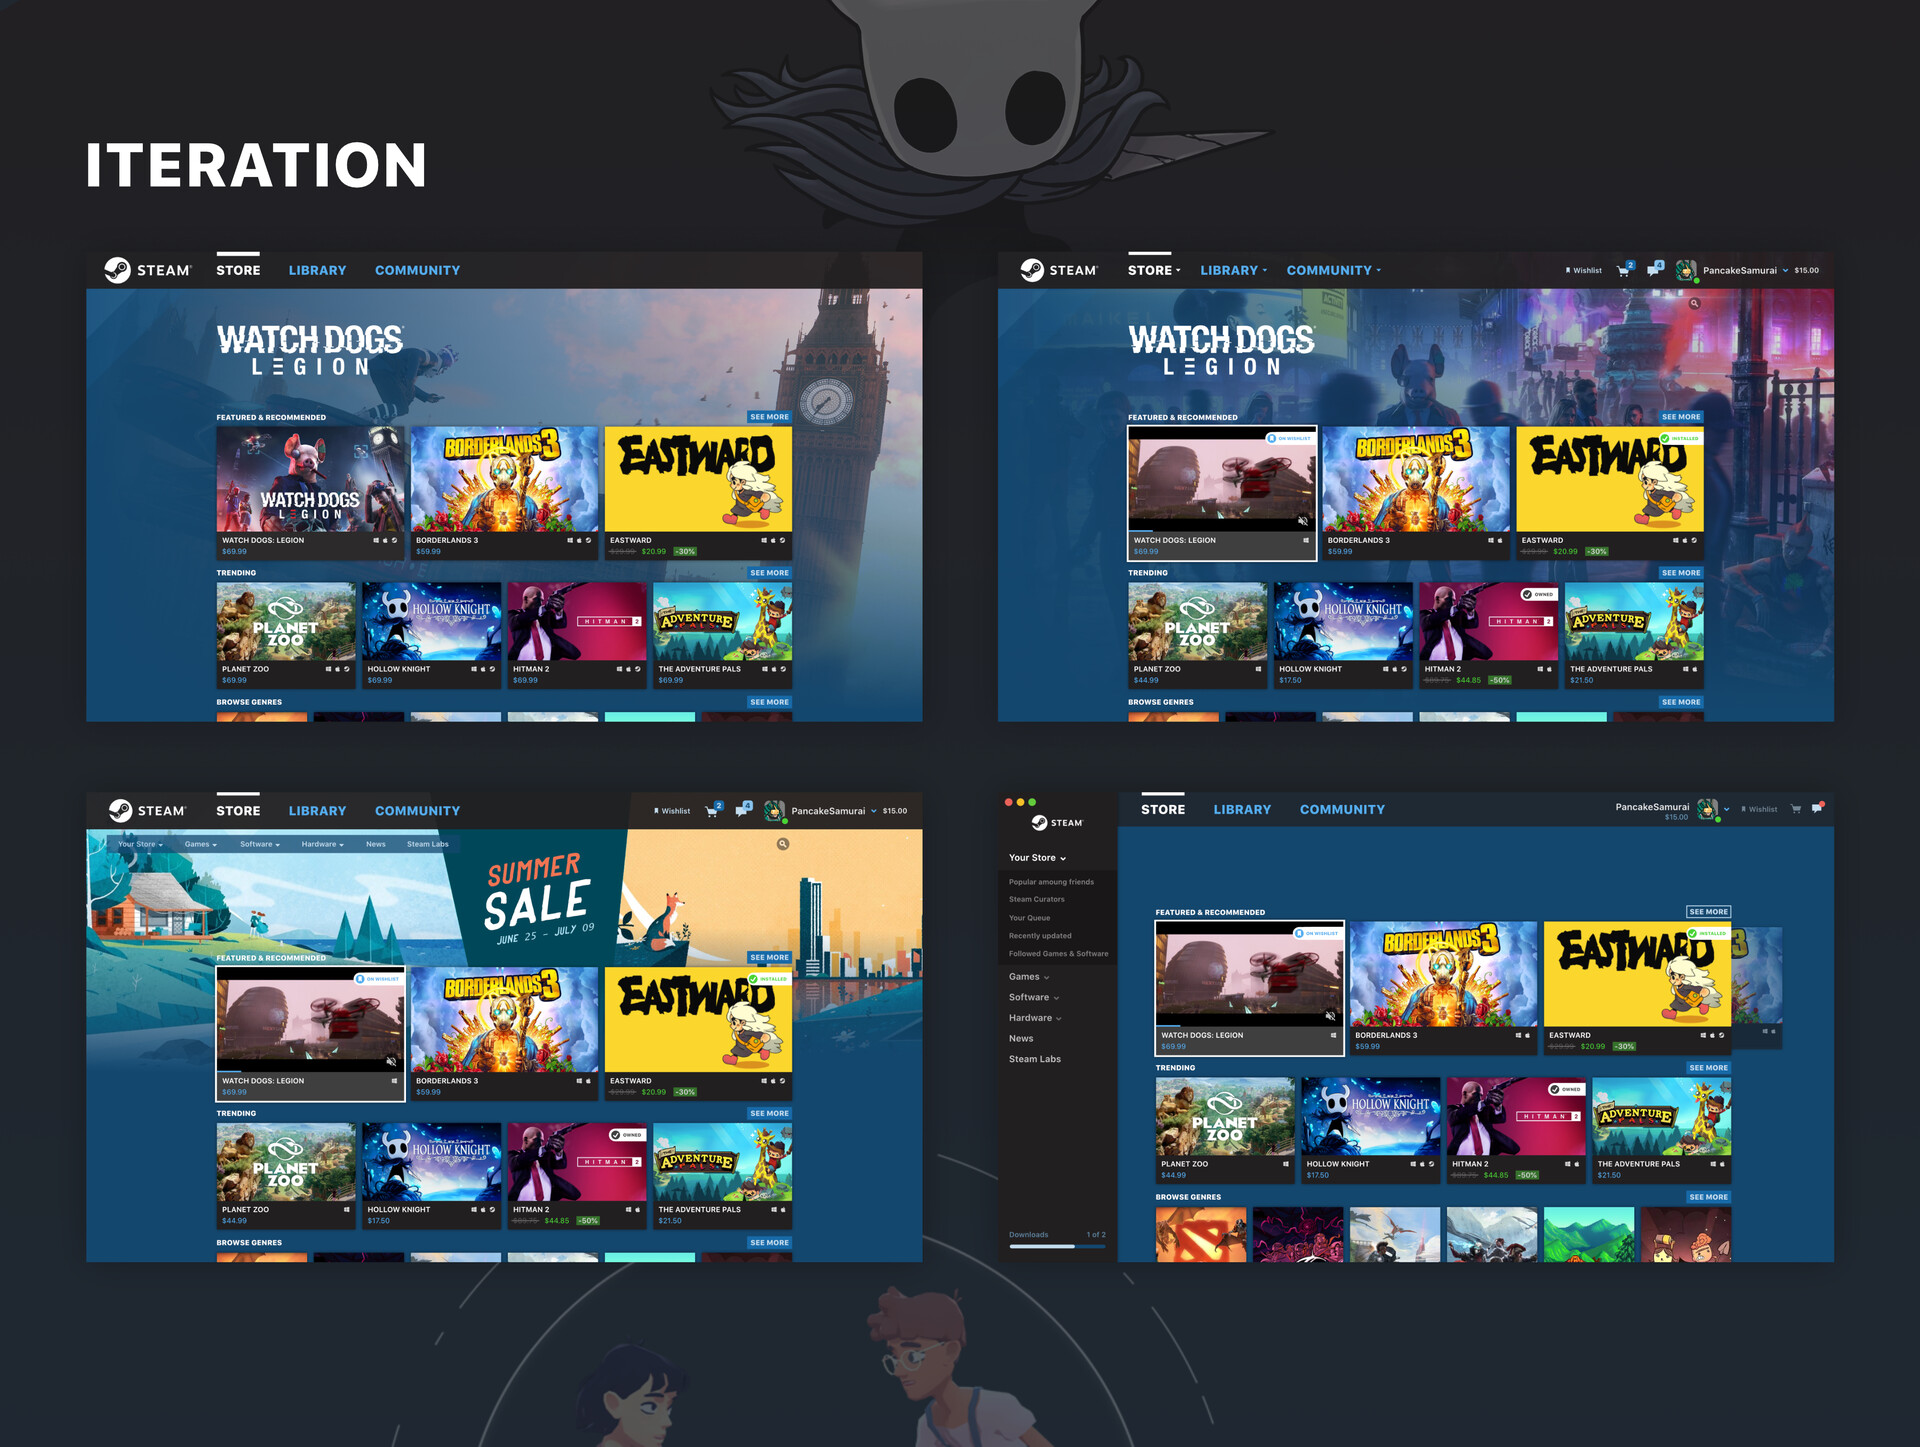 Steam Store Page Redesign (1/2) by Seb Jachec on Dribbble